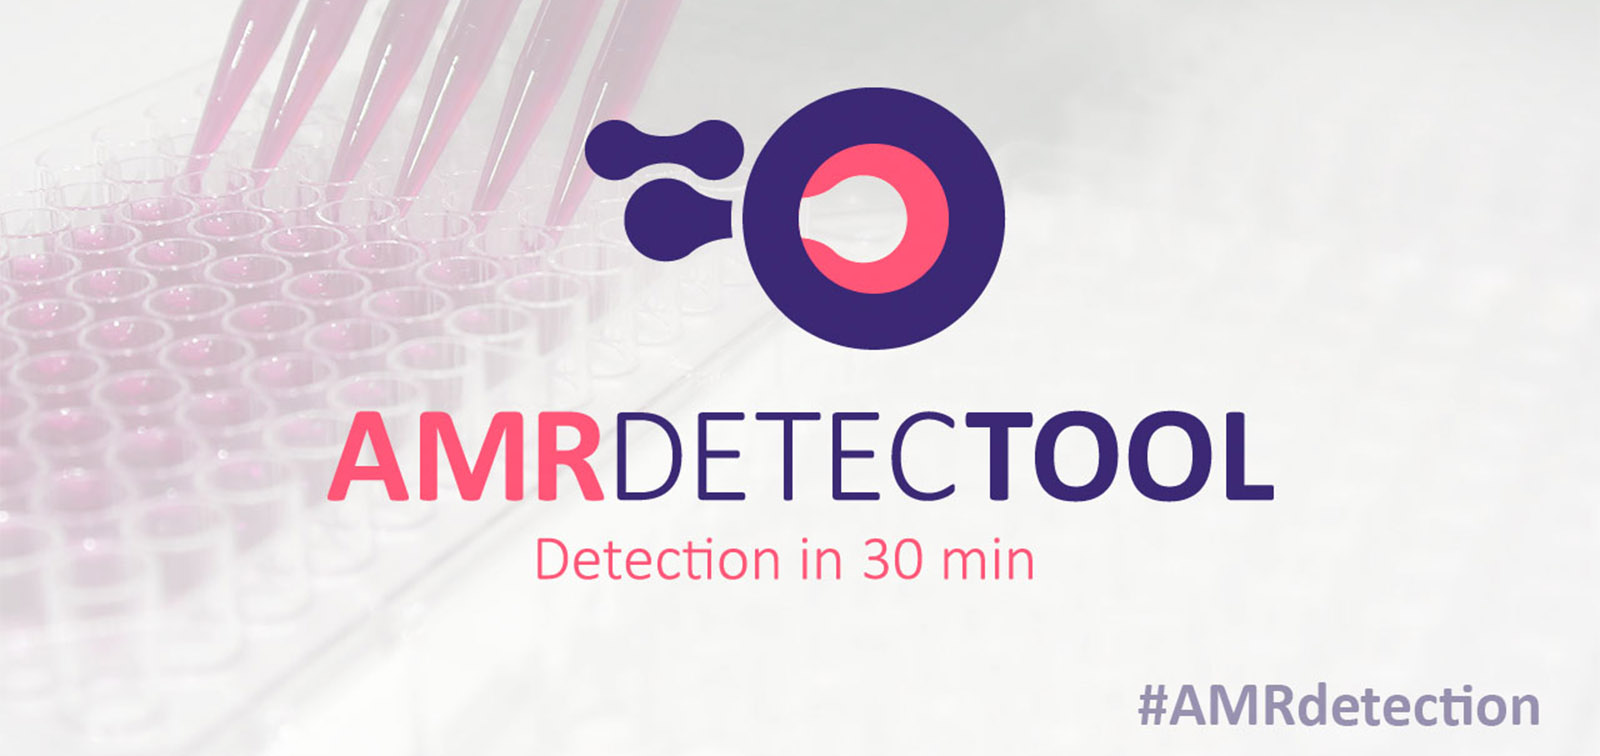 AMR DetecTool, a project funded by EIT Health